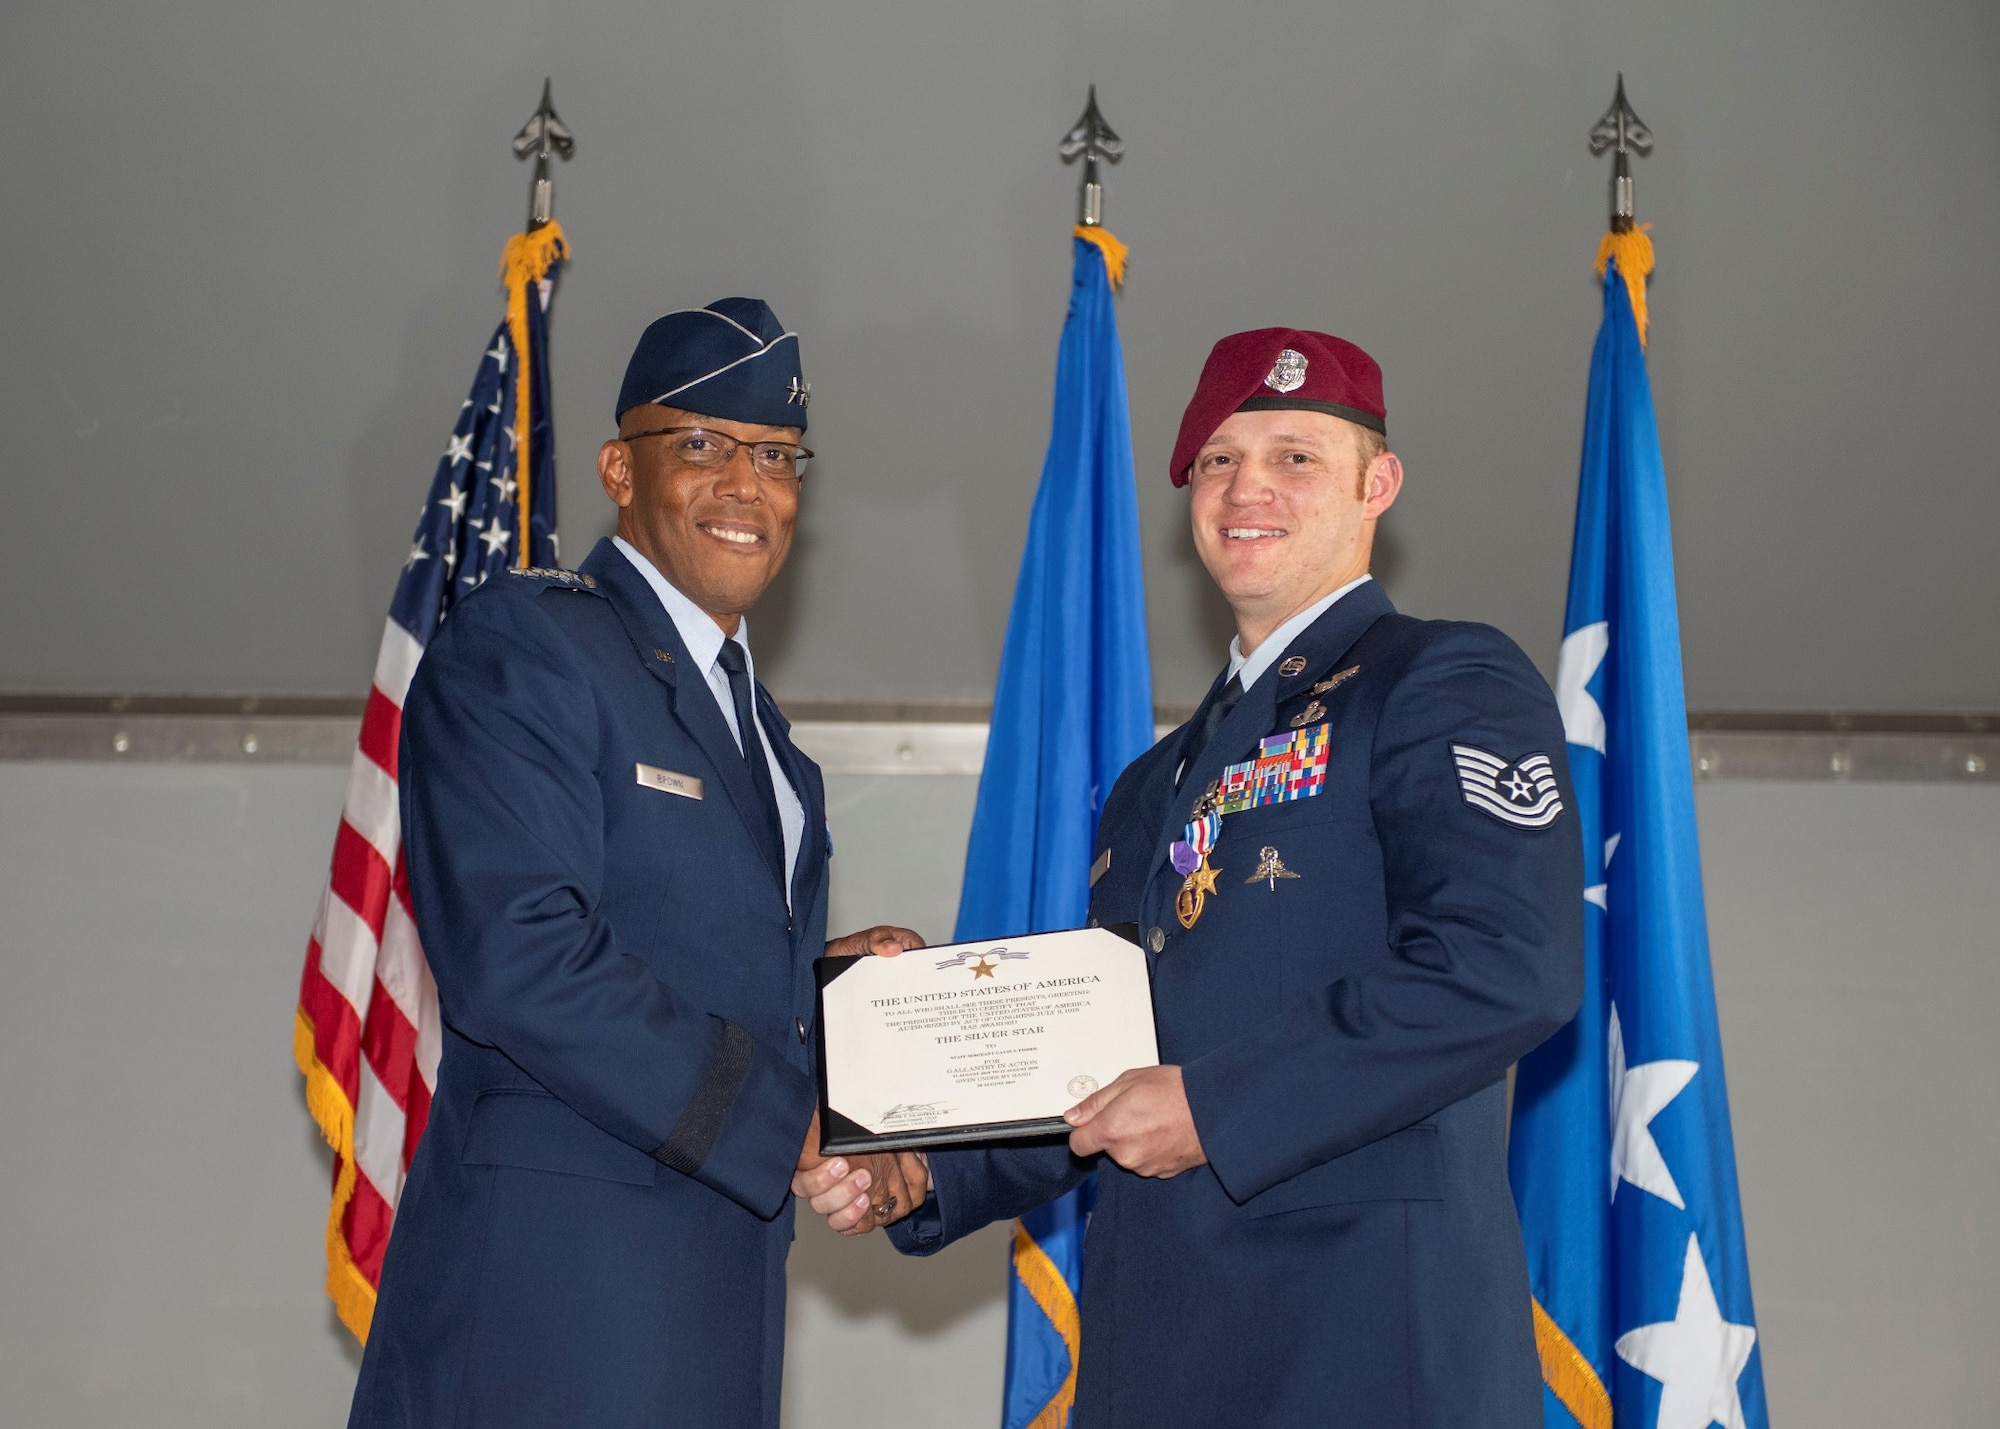 An Airman holds an award while presenting it to another Airman.